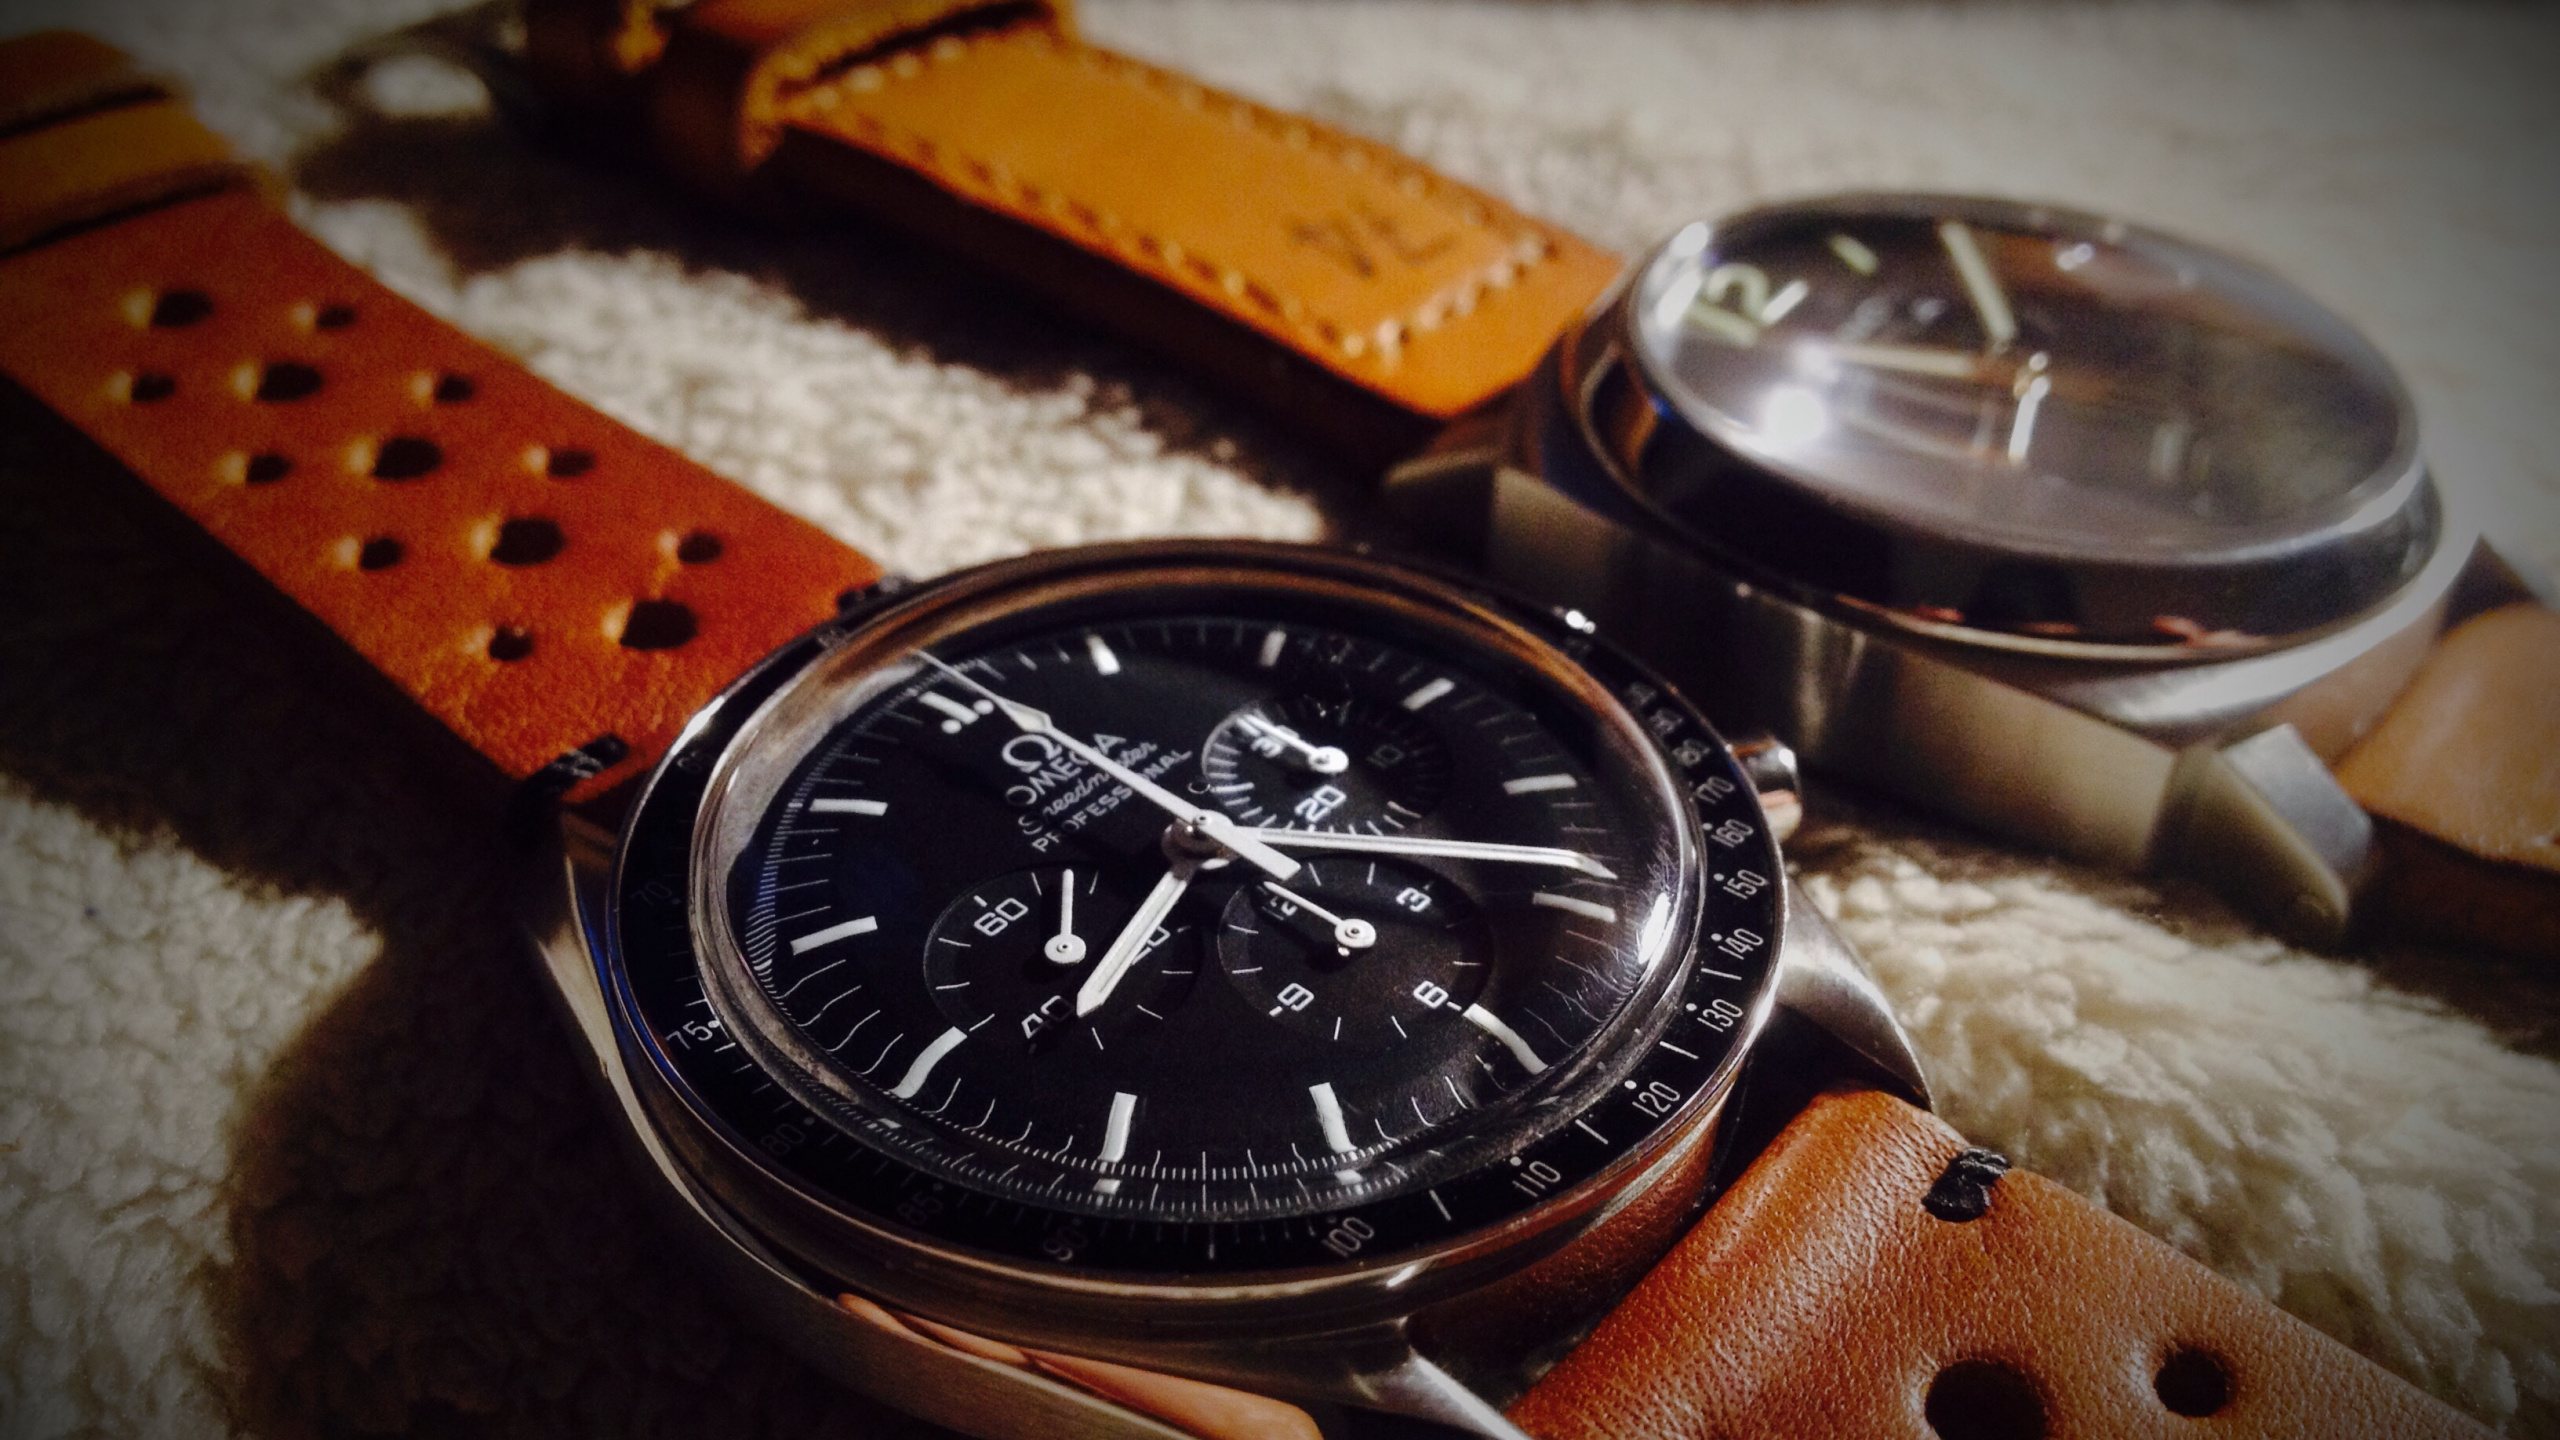 Brown Leather Strap Silver Round Chronograph Watch. Wallpaper in 2560x1440 Resolution